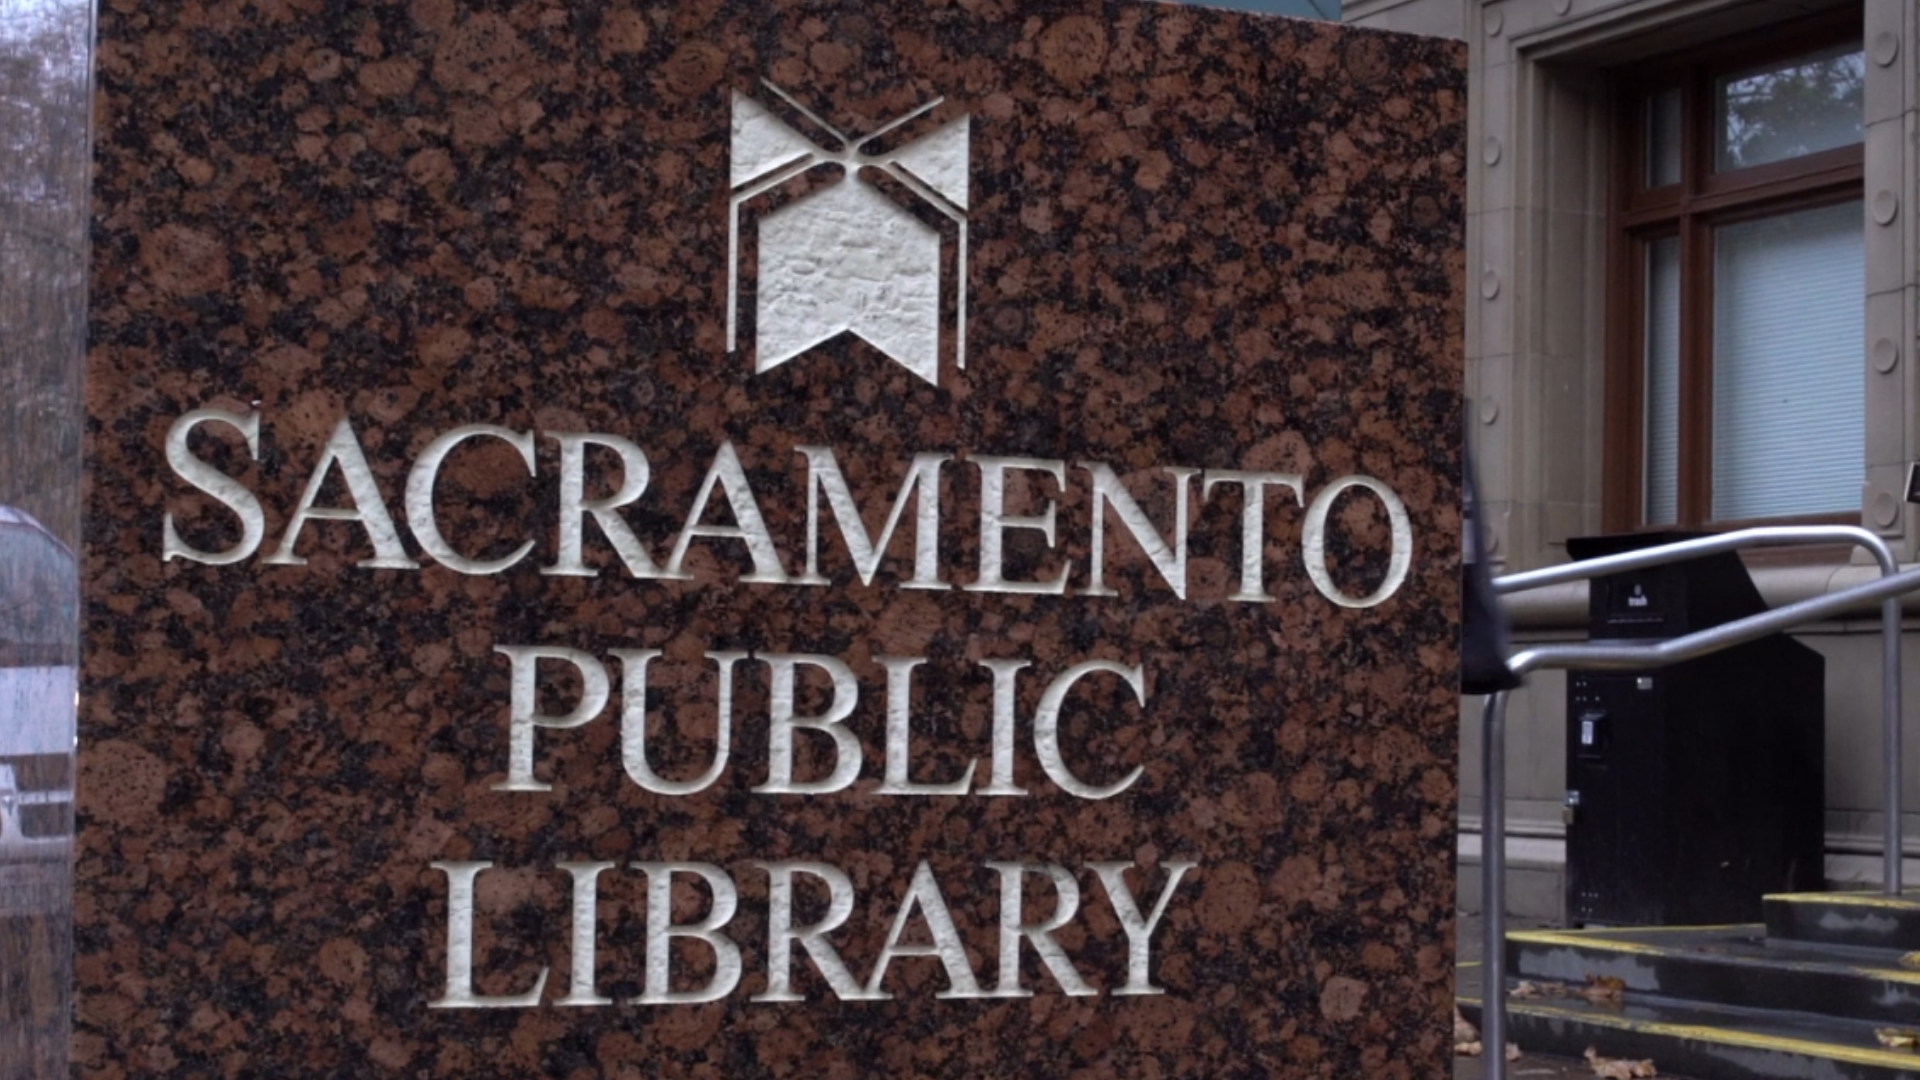 Throughout the pandemic, the library has offered curbside pickup and return services for books, but now their doors are open for browsing and computer use.